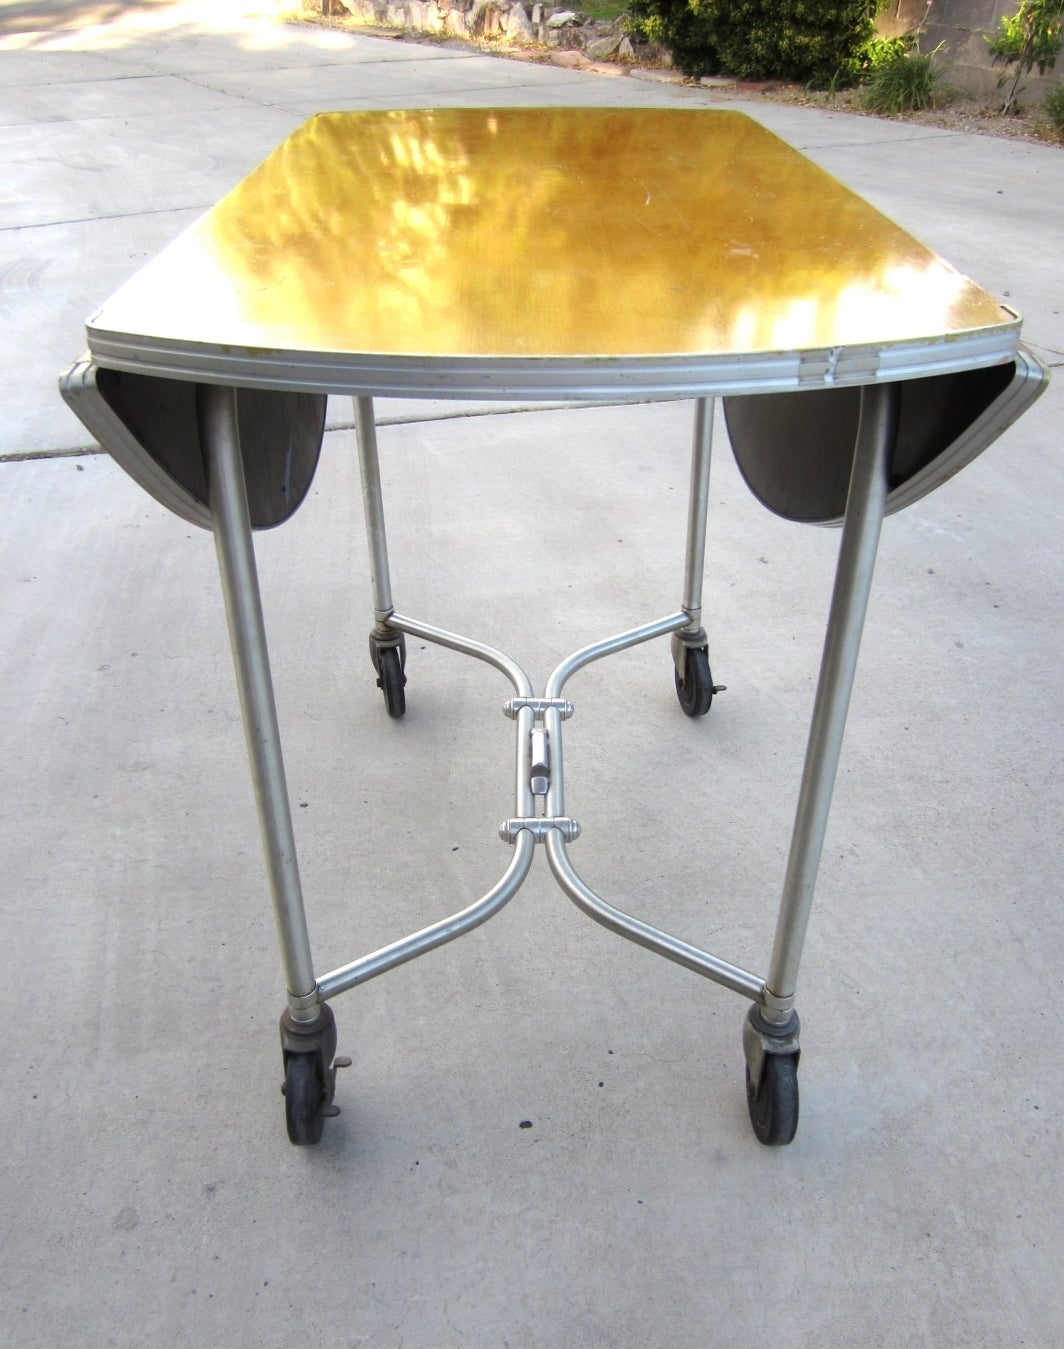 Warren McArthur design rolling gate leaf service table, circa 1930s
Aluminum tube frame with maple veneer top trimmed in ribbed aluminum. 
Four large caster wheels with locks on two.
It is in excellent original vintage condition. Stunning design.